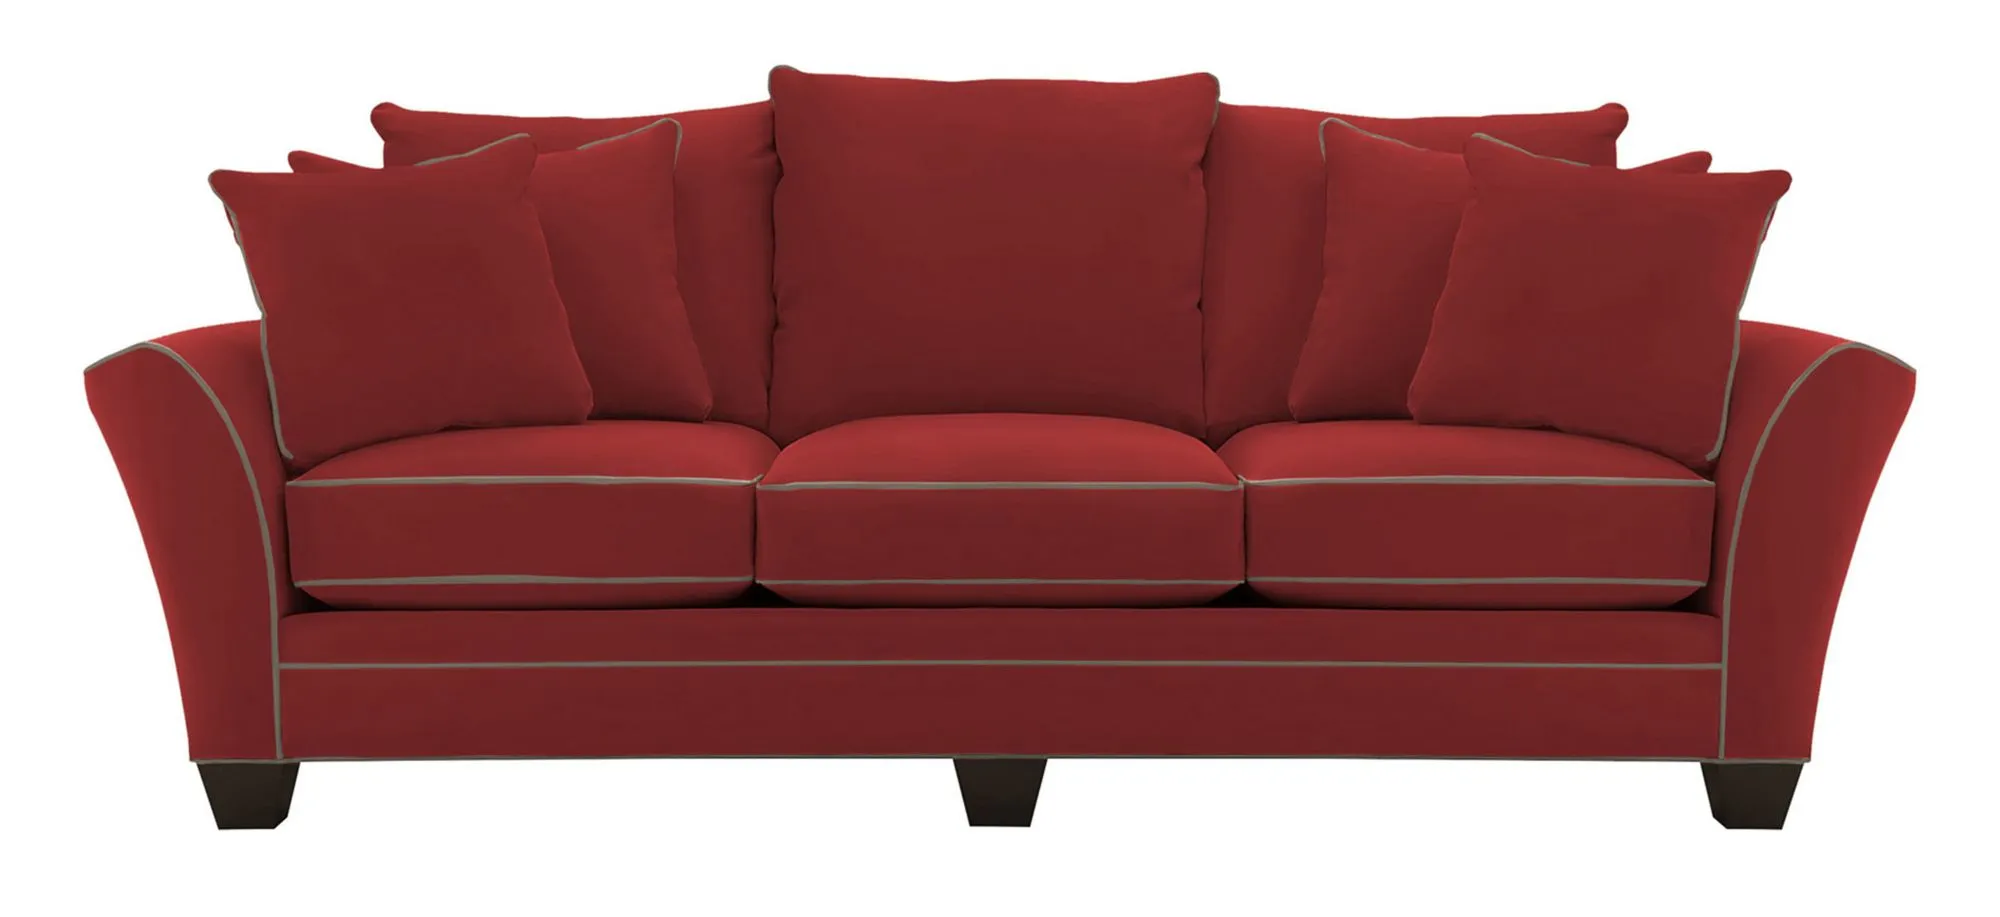 Briarwood Sofa in Suede So Soft Cardinal/Mineral by H.M. Richards